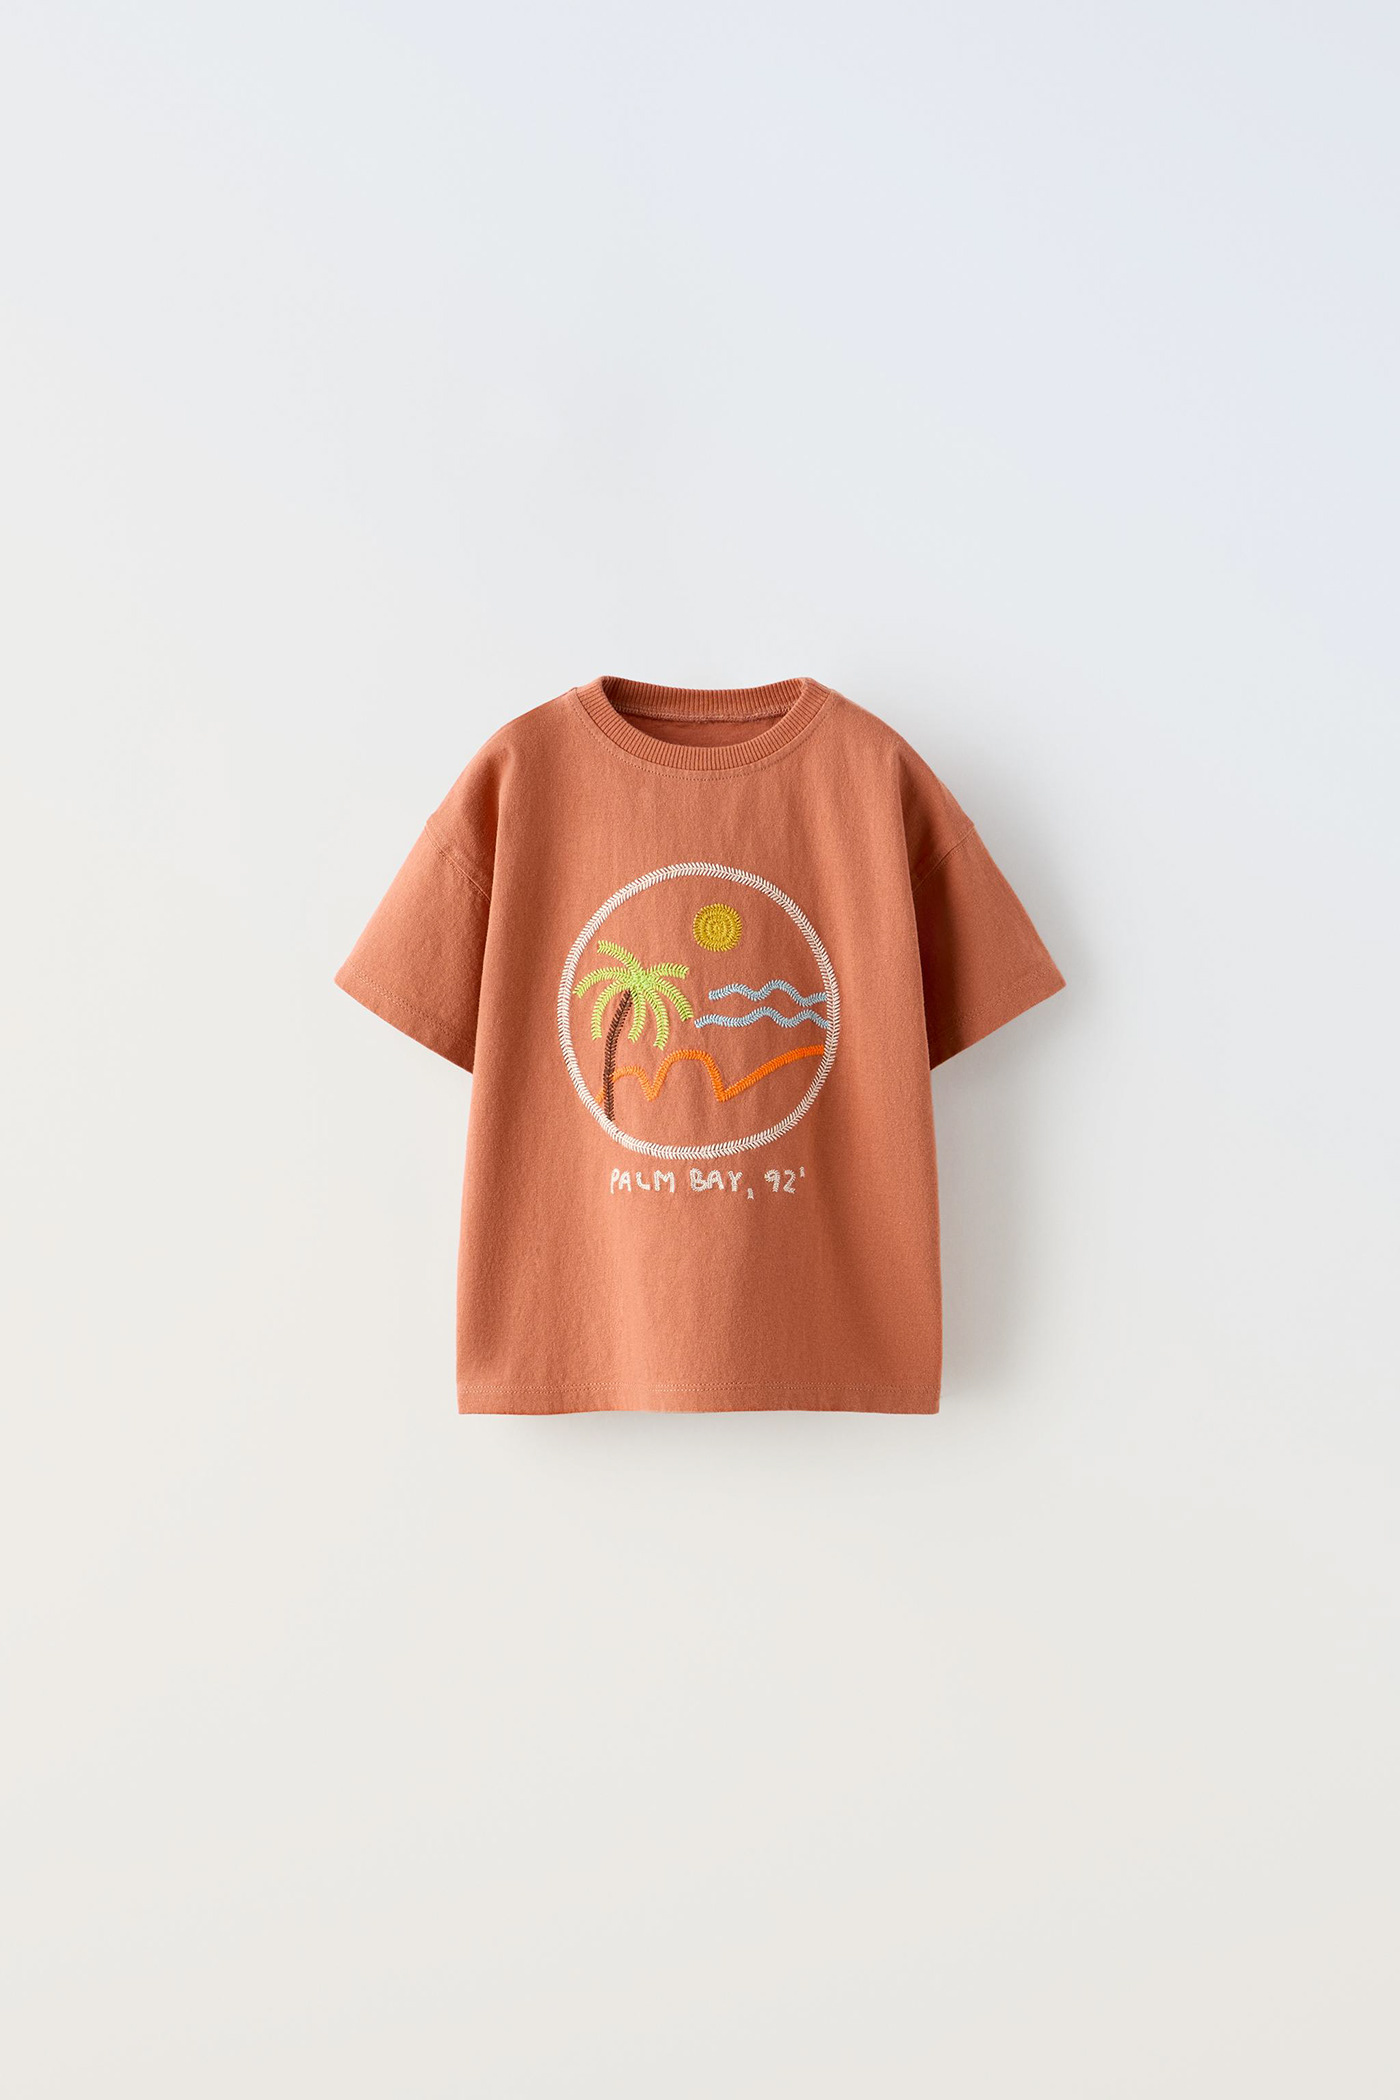 Embroidery t-shirt Island baby